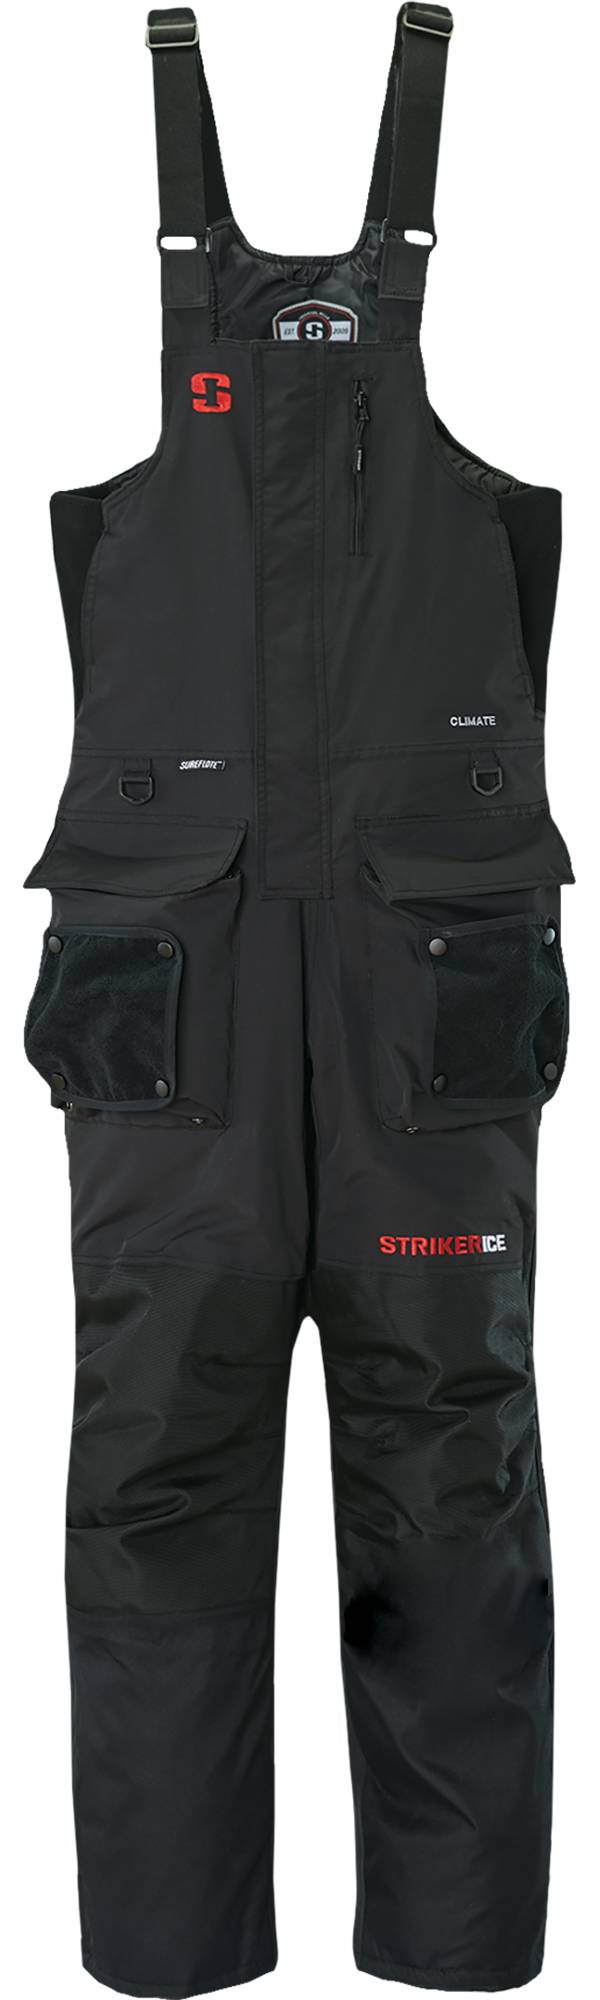 Striker Ice Men's Climate Ice Fishing Bibs (2017) product image